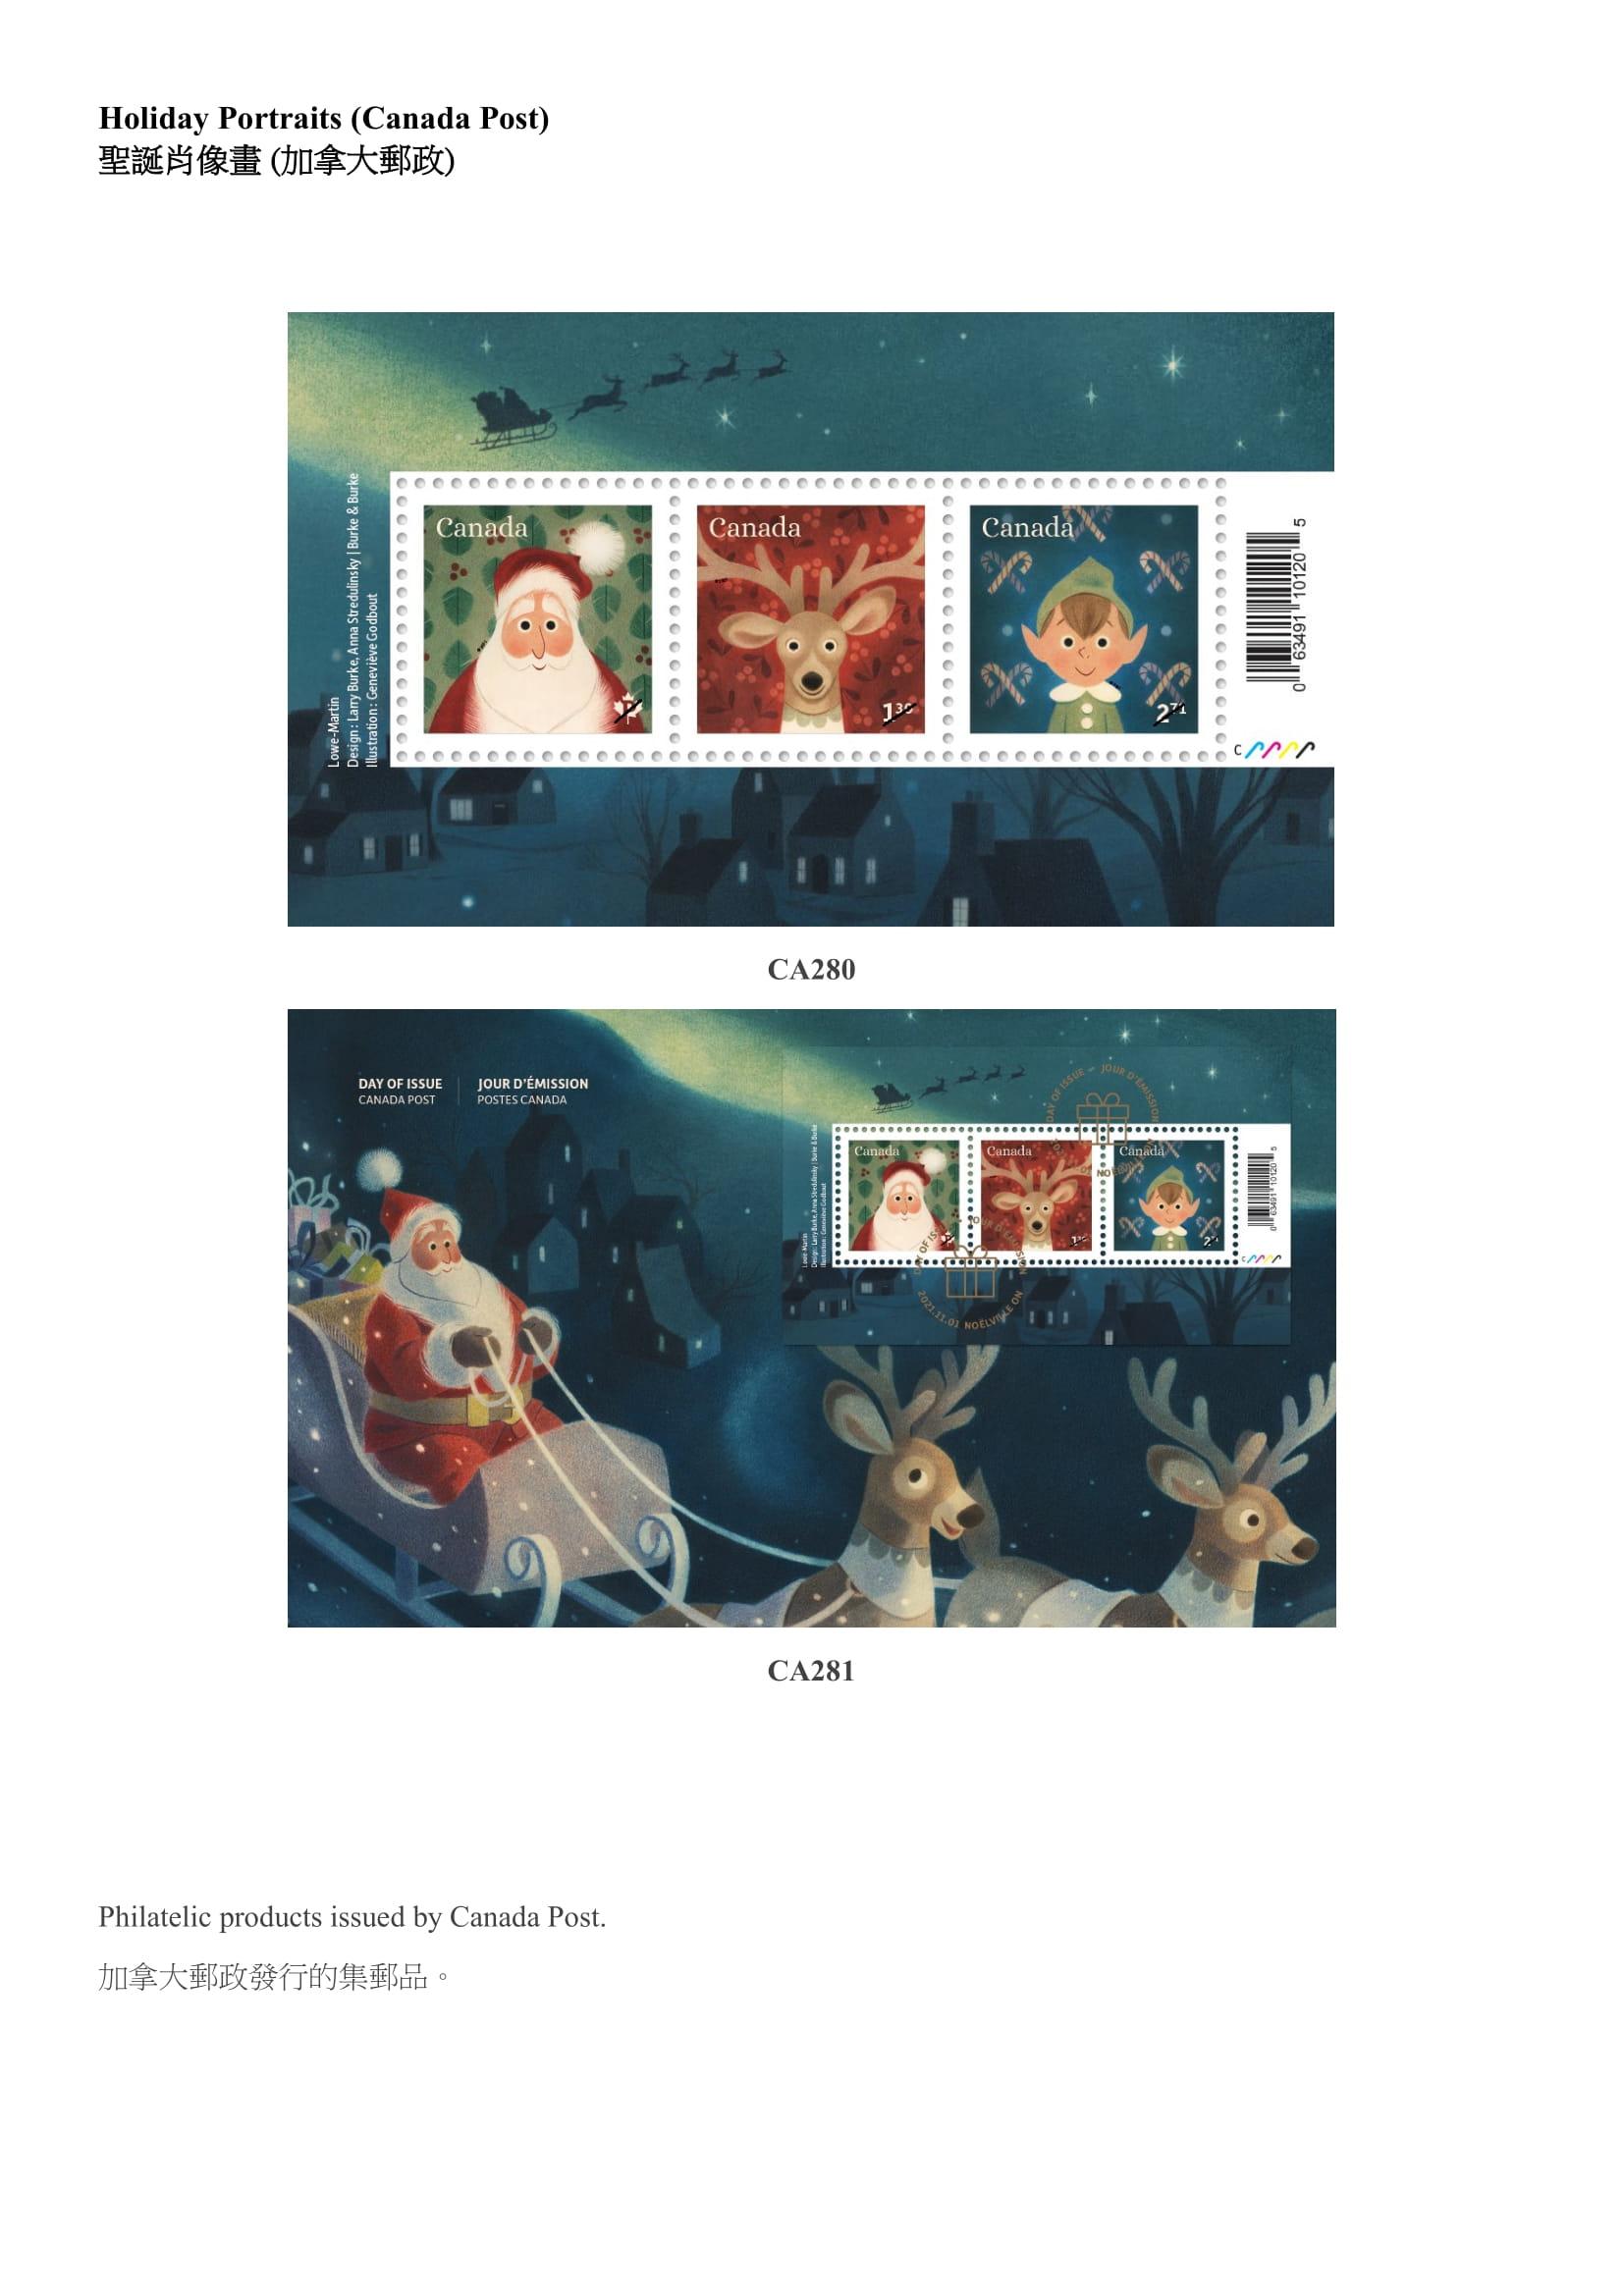 Hongkong Post announced today (December 14) that selected philatelic products issued by Macao and overseas postal administrations, including Australia, Canada, Japan, Liechtenstein and New Zealand, will be put on sale at the Hongkong Post online shopping mall ShopThruPost starting from 8am on December 16. Picture shows philatelic products issued by Canada Post.

